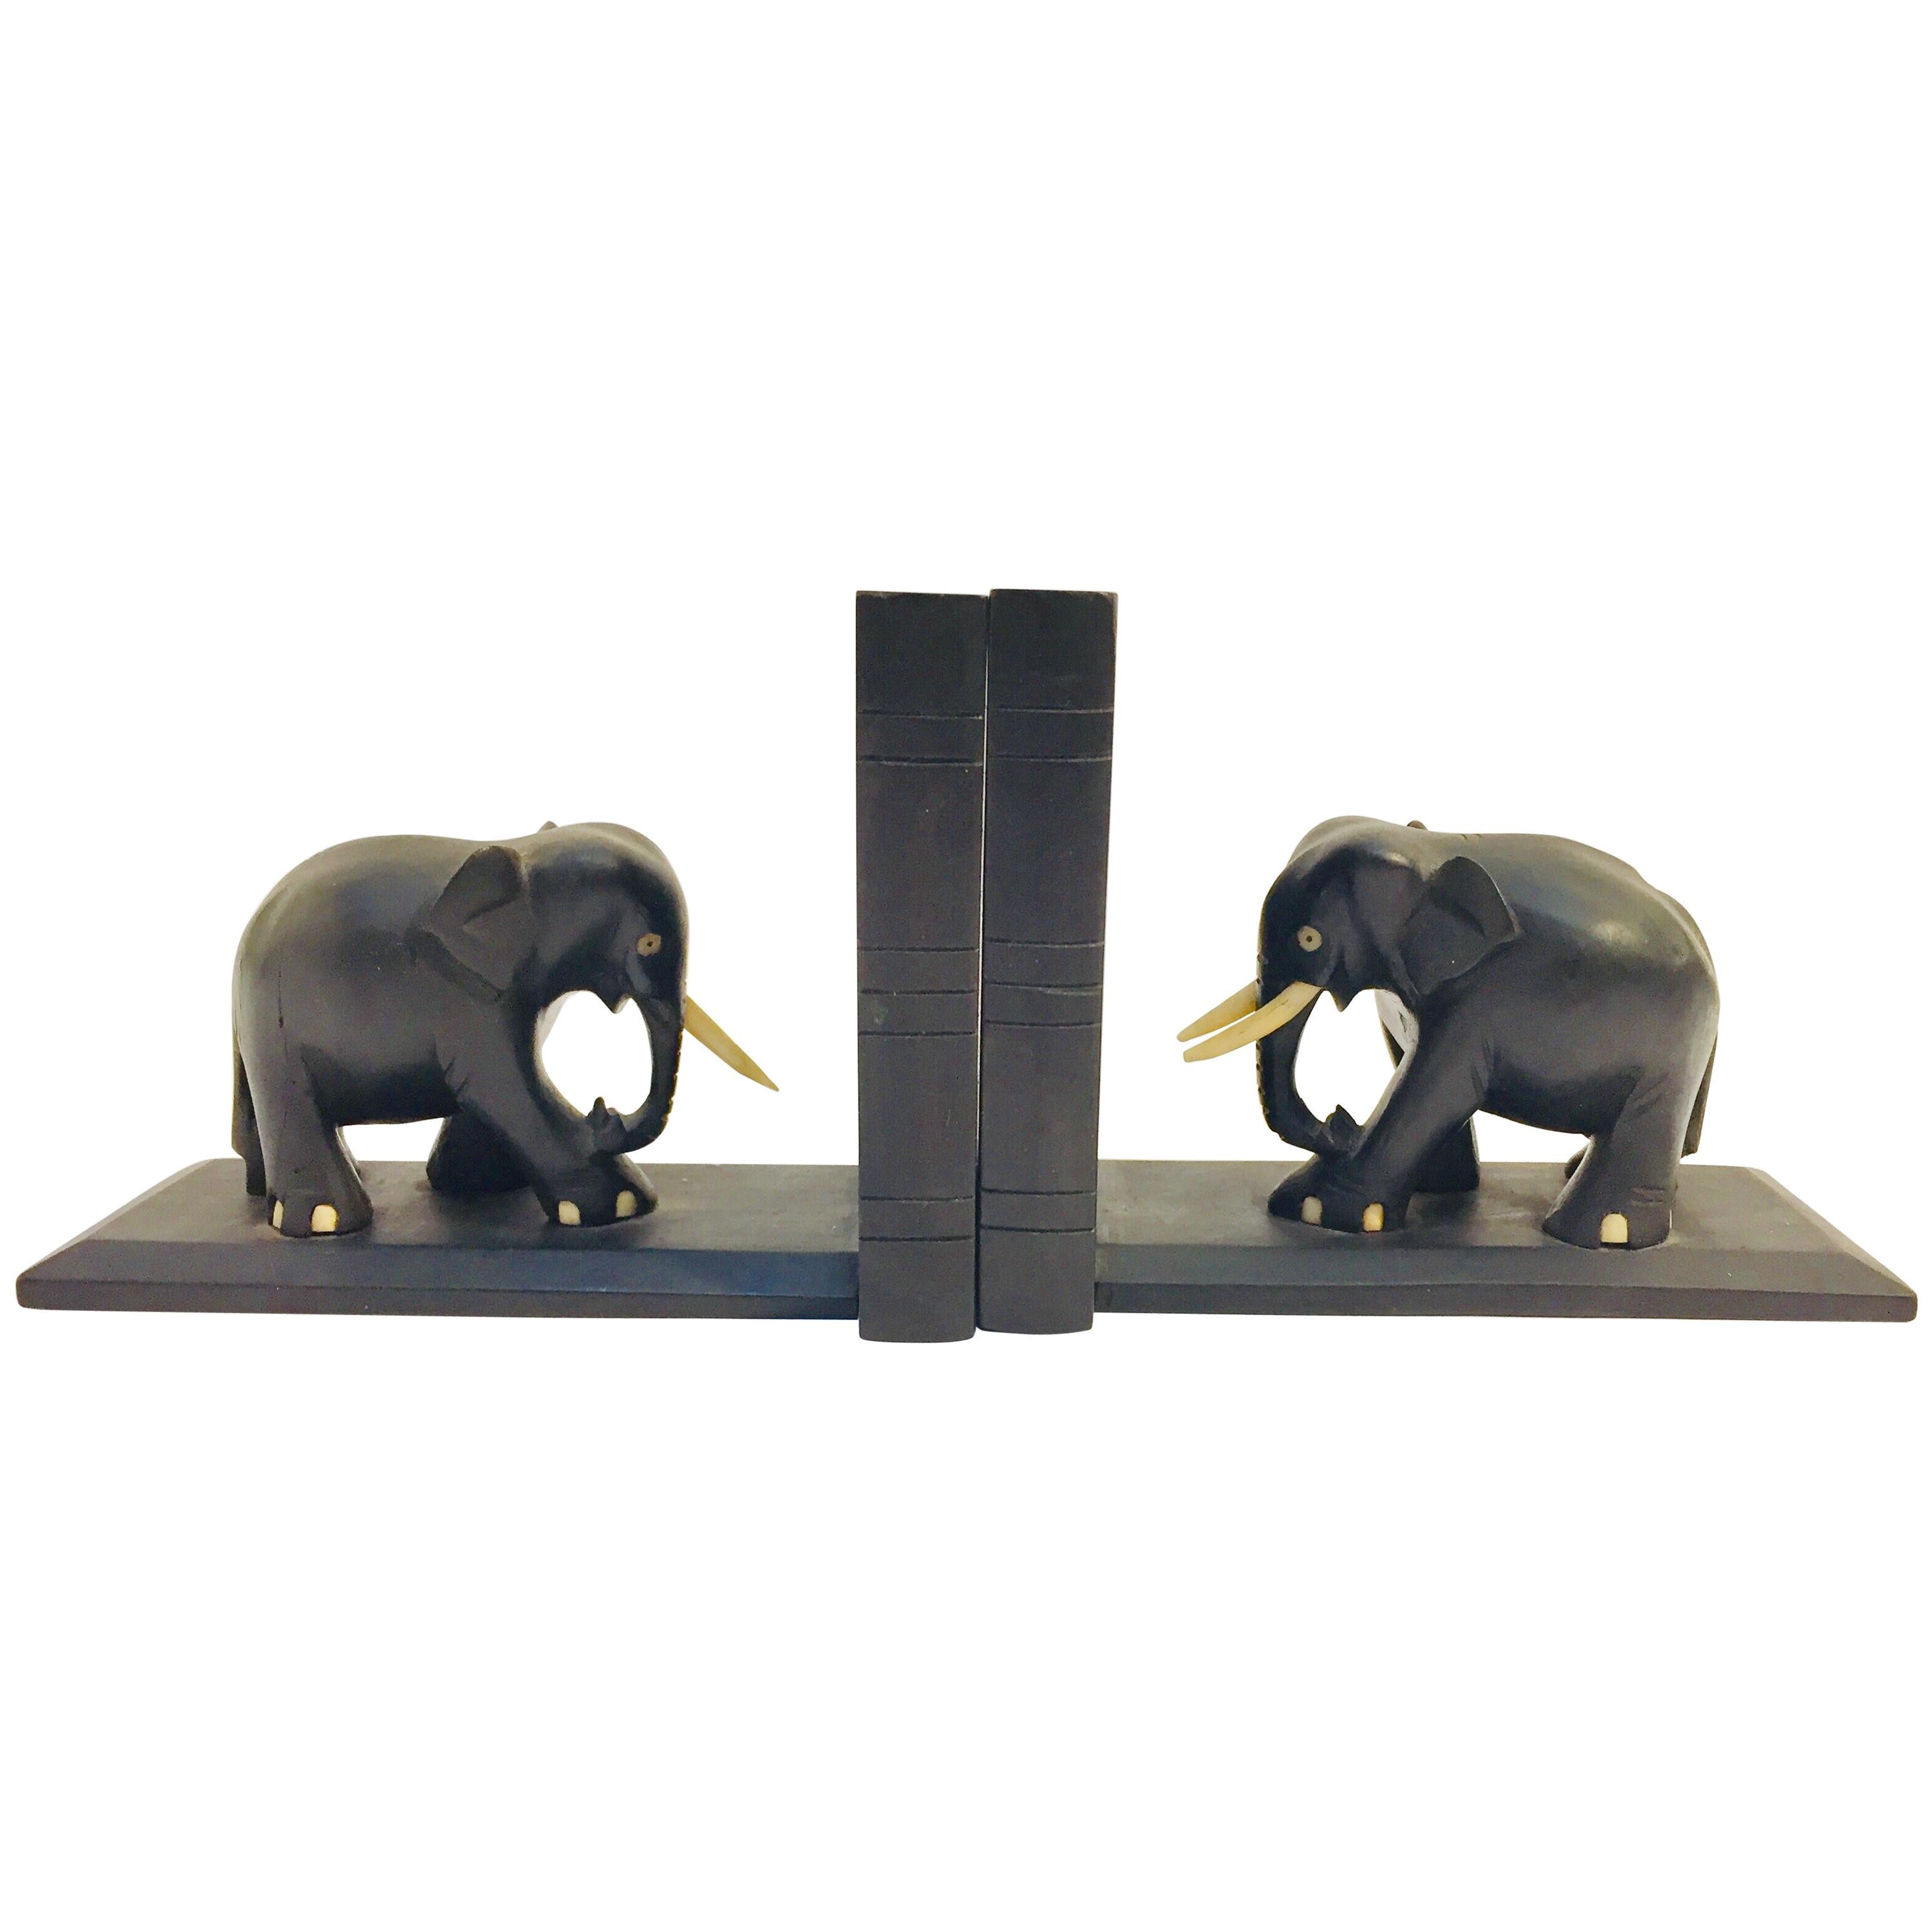 Ebony Hand Carved Wooden Elephant Bookends